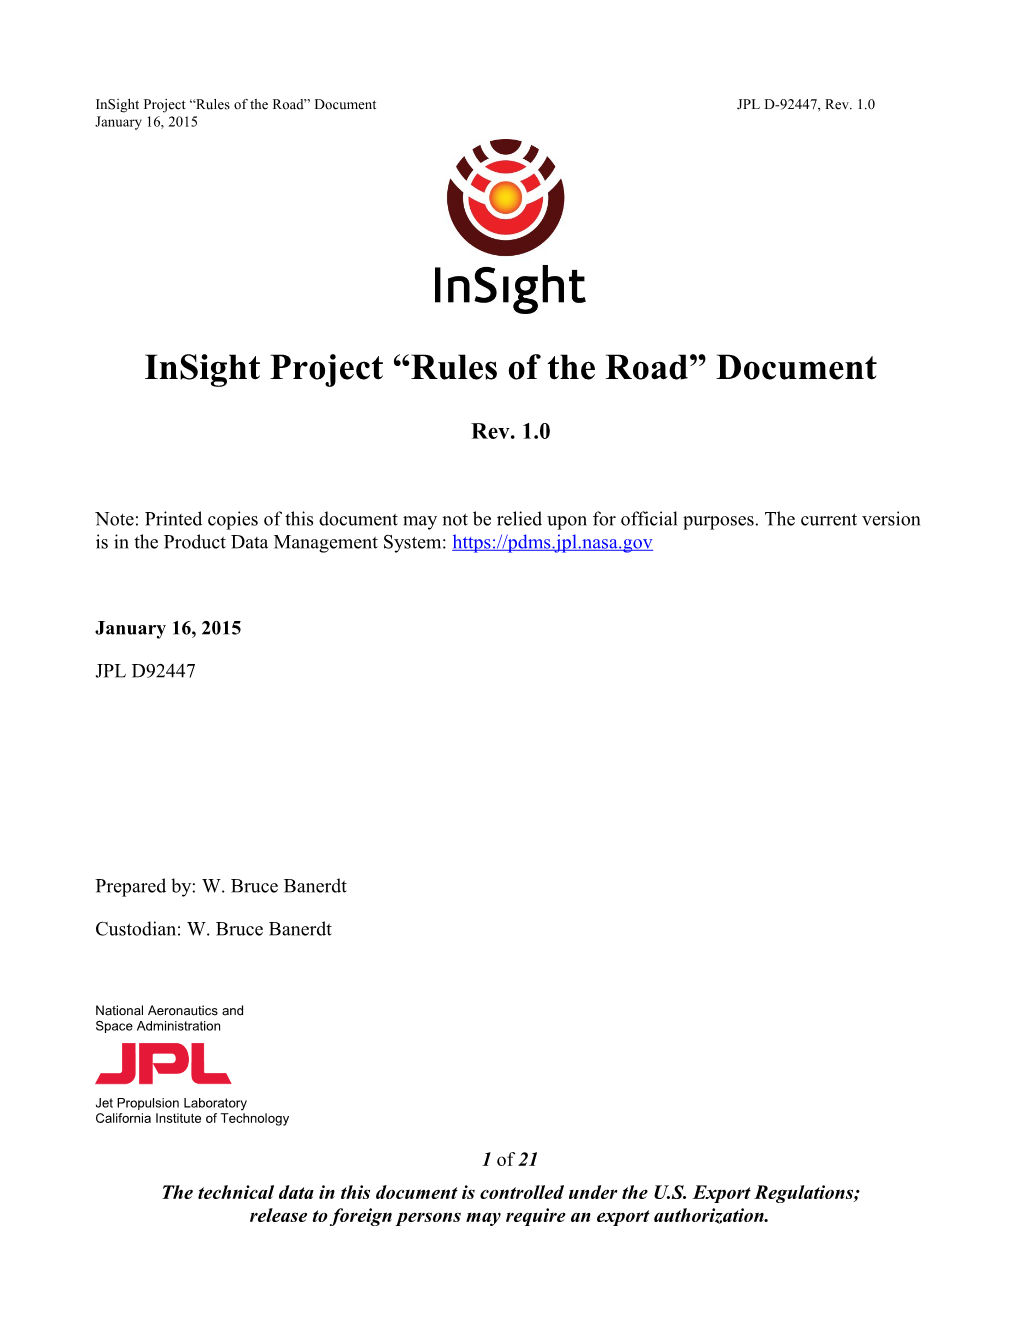 Insight Project Rules of the Road Document